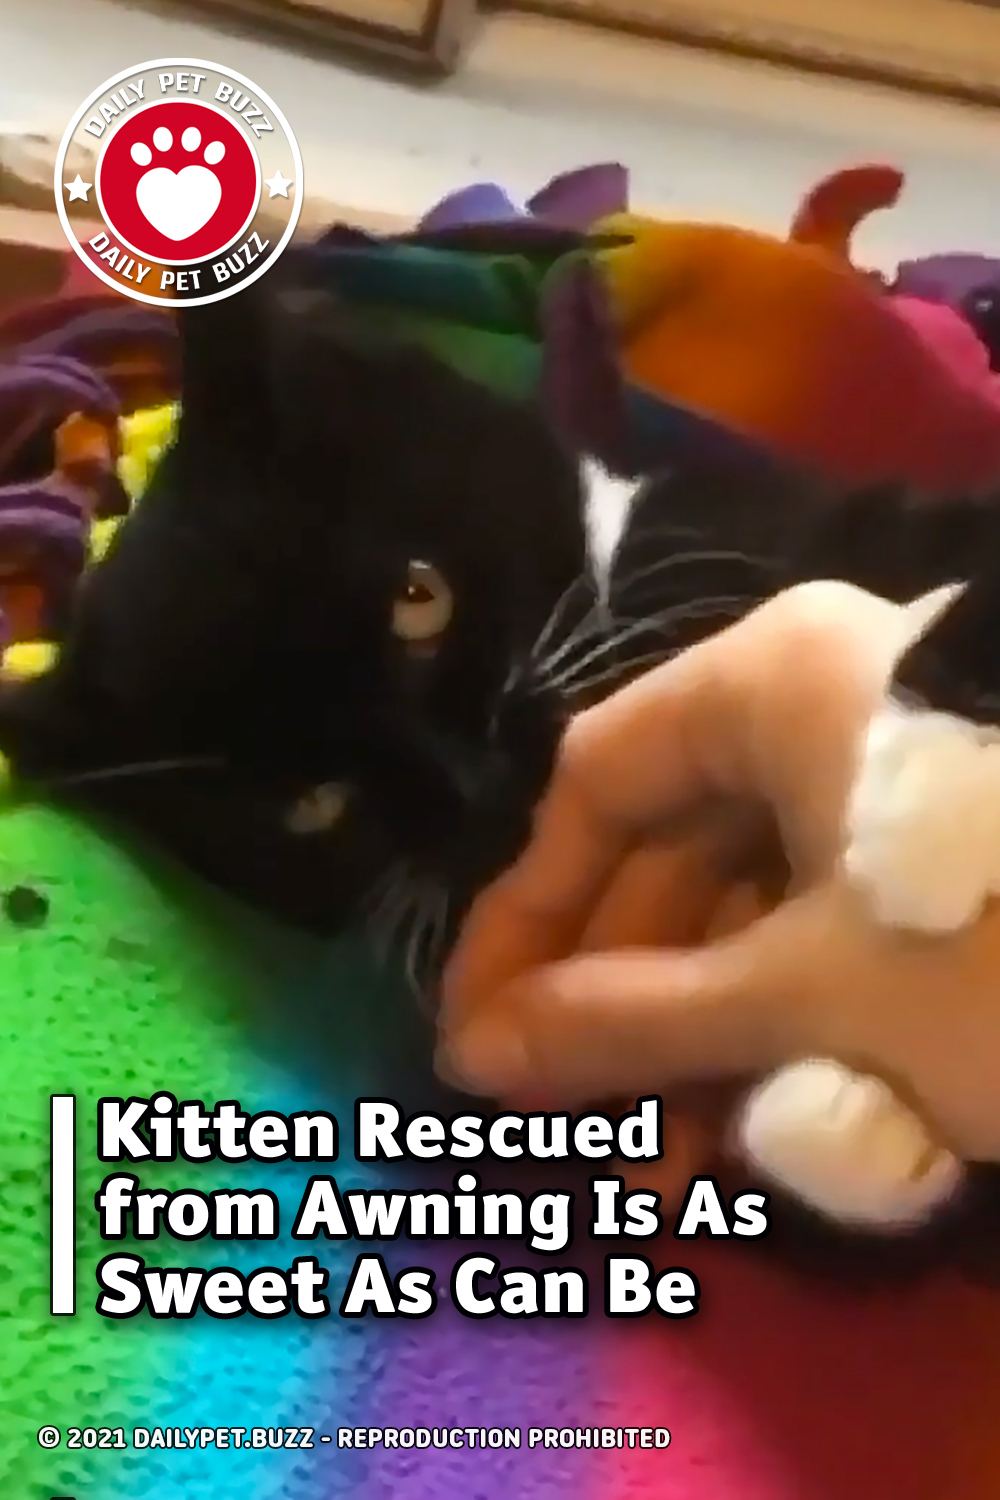 Kitten Rescued from Awning Is As Sweet As Can Be